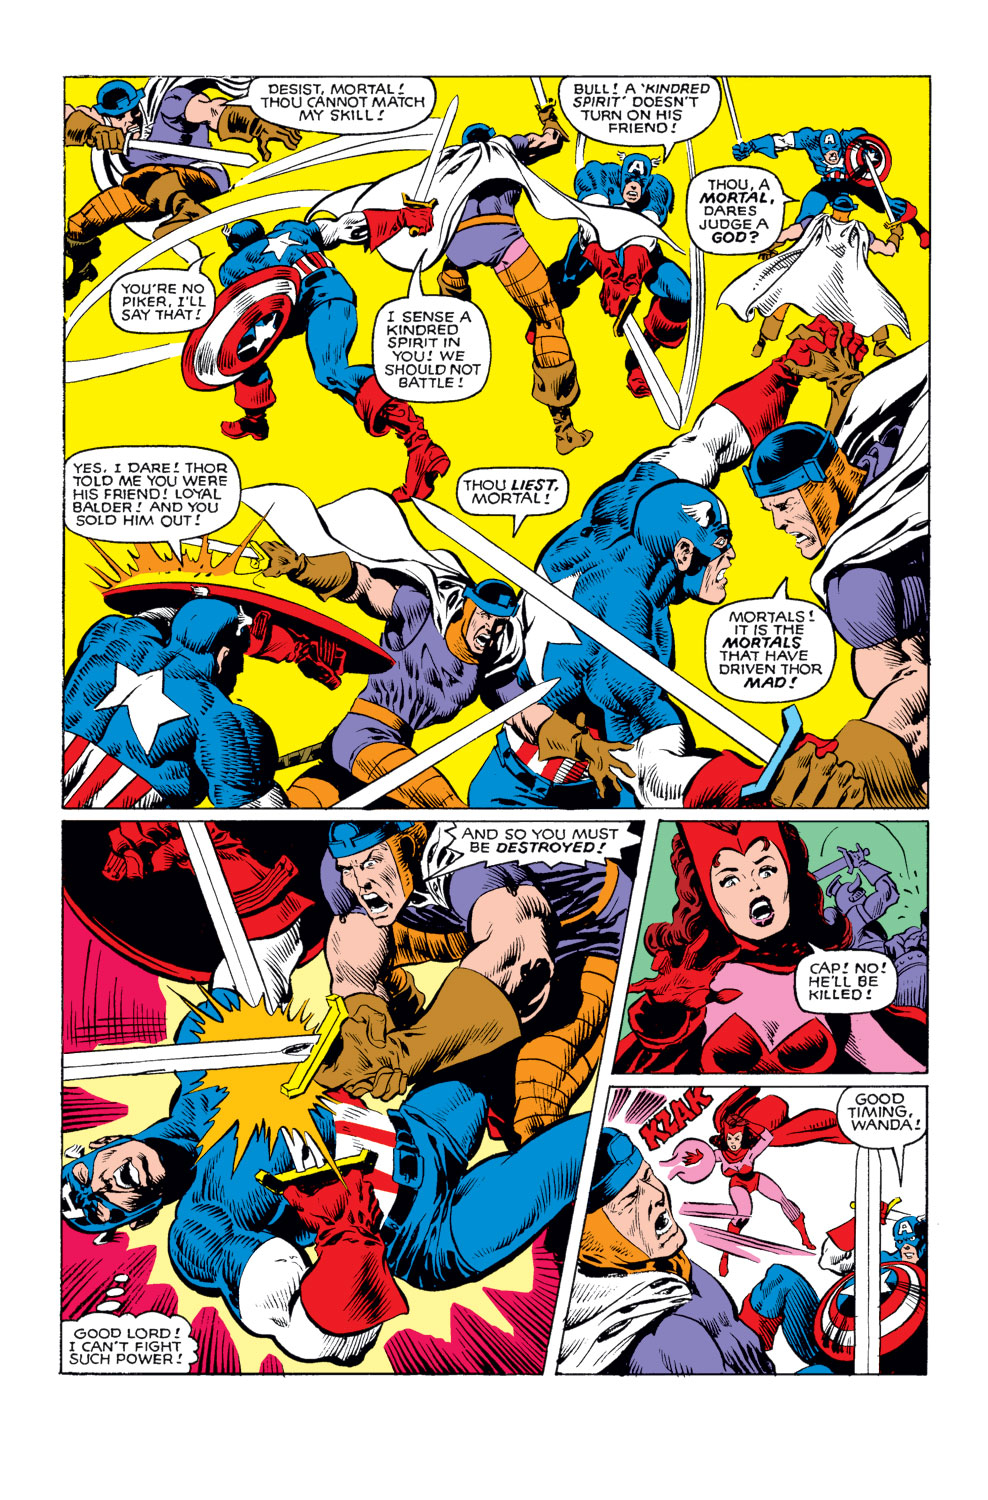 What If? (1977) issue 25 - Thor and the Avengers battled the gods - Page 18